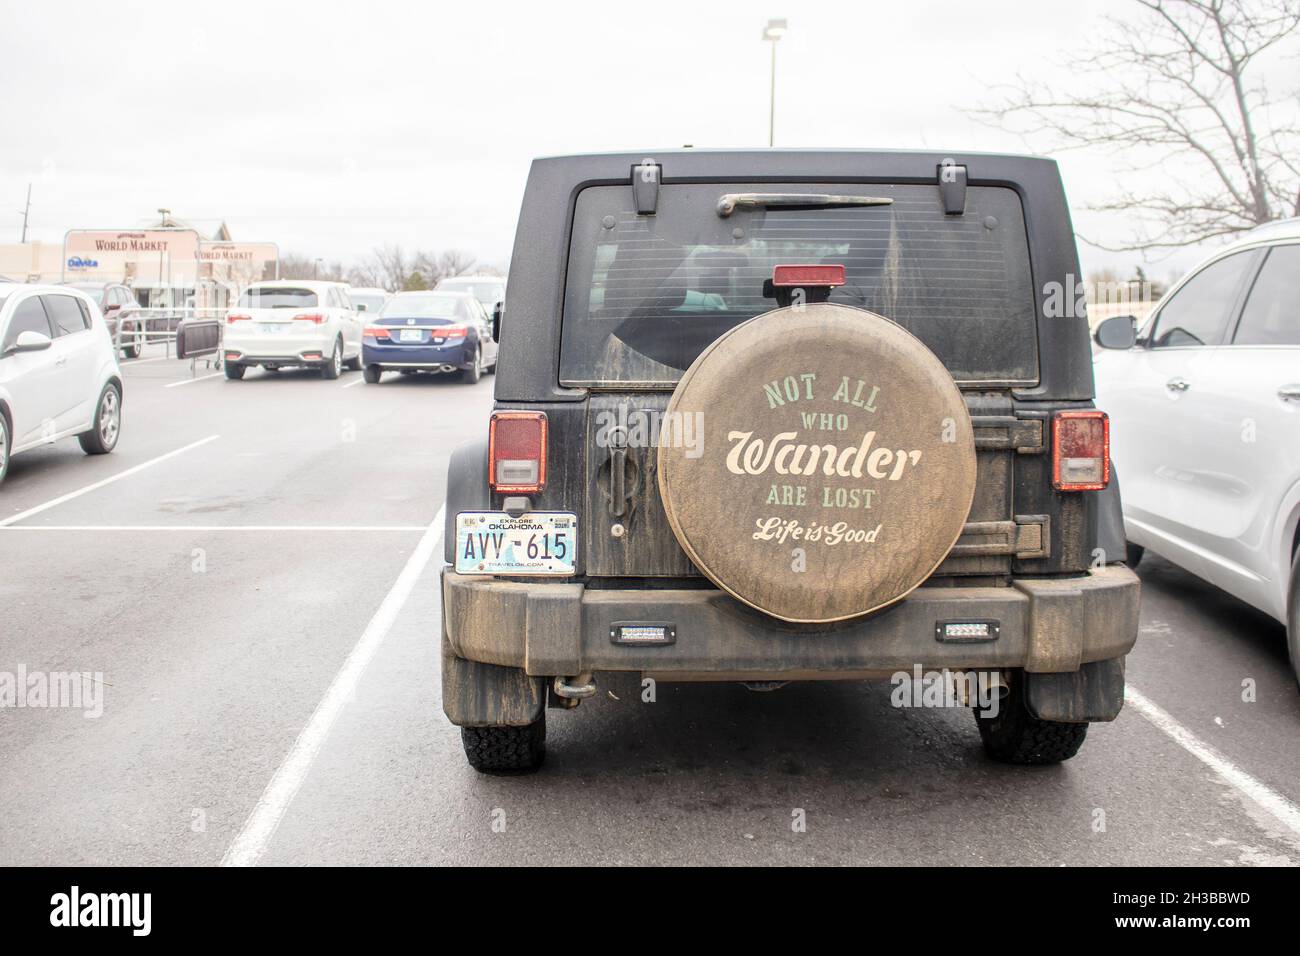 2019 01 12 Tulsa OK USA Dark dirty off road jeep parked in parking lot with wheel cover reading All Who Wander are Not Lost - Life is Good Stock Photo